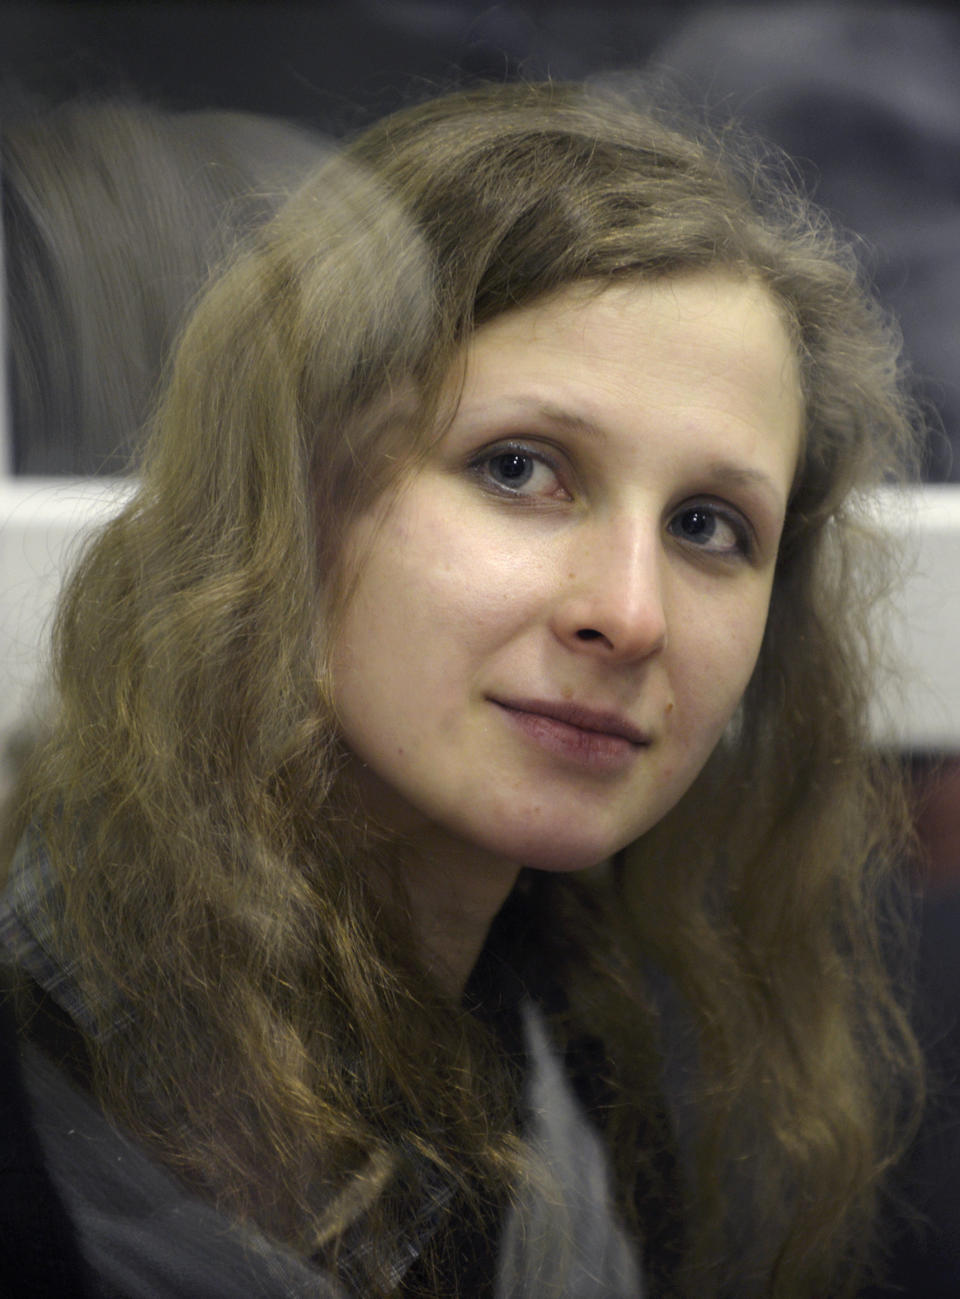 FILE - In this Wednesday, Jan. 16, 2013 file photo, jailed feminist punk band Pussy Riot member Maria Alekhina is in a defendant's cage in a court room in the town of Berezniki, some 1500 km (940 miles) north-east of Moscow, Russia. The imprisoned member of the punk band Pussy Riot is going on hunger strike on Wednesday, May 22, 2013, after a judge refused to allow her to attend a court hearing. Alekhina was convicted of hooliganism motivated by religious hatred, last year, along with two other Pussy Riot band members for an anti-President Vladimir Putin stunt in Russia’s main cathedral. (AP Photo/Alexander Agafonov, file)